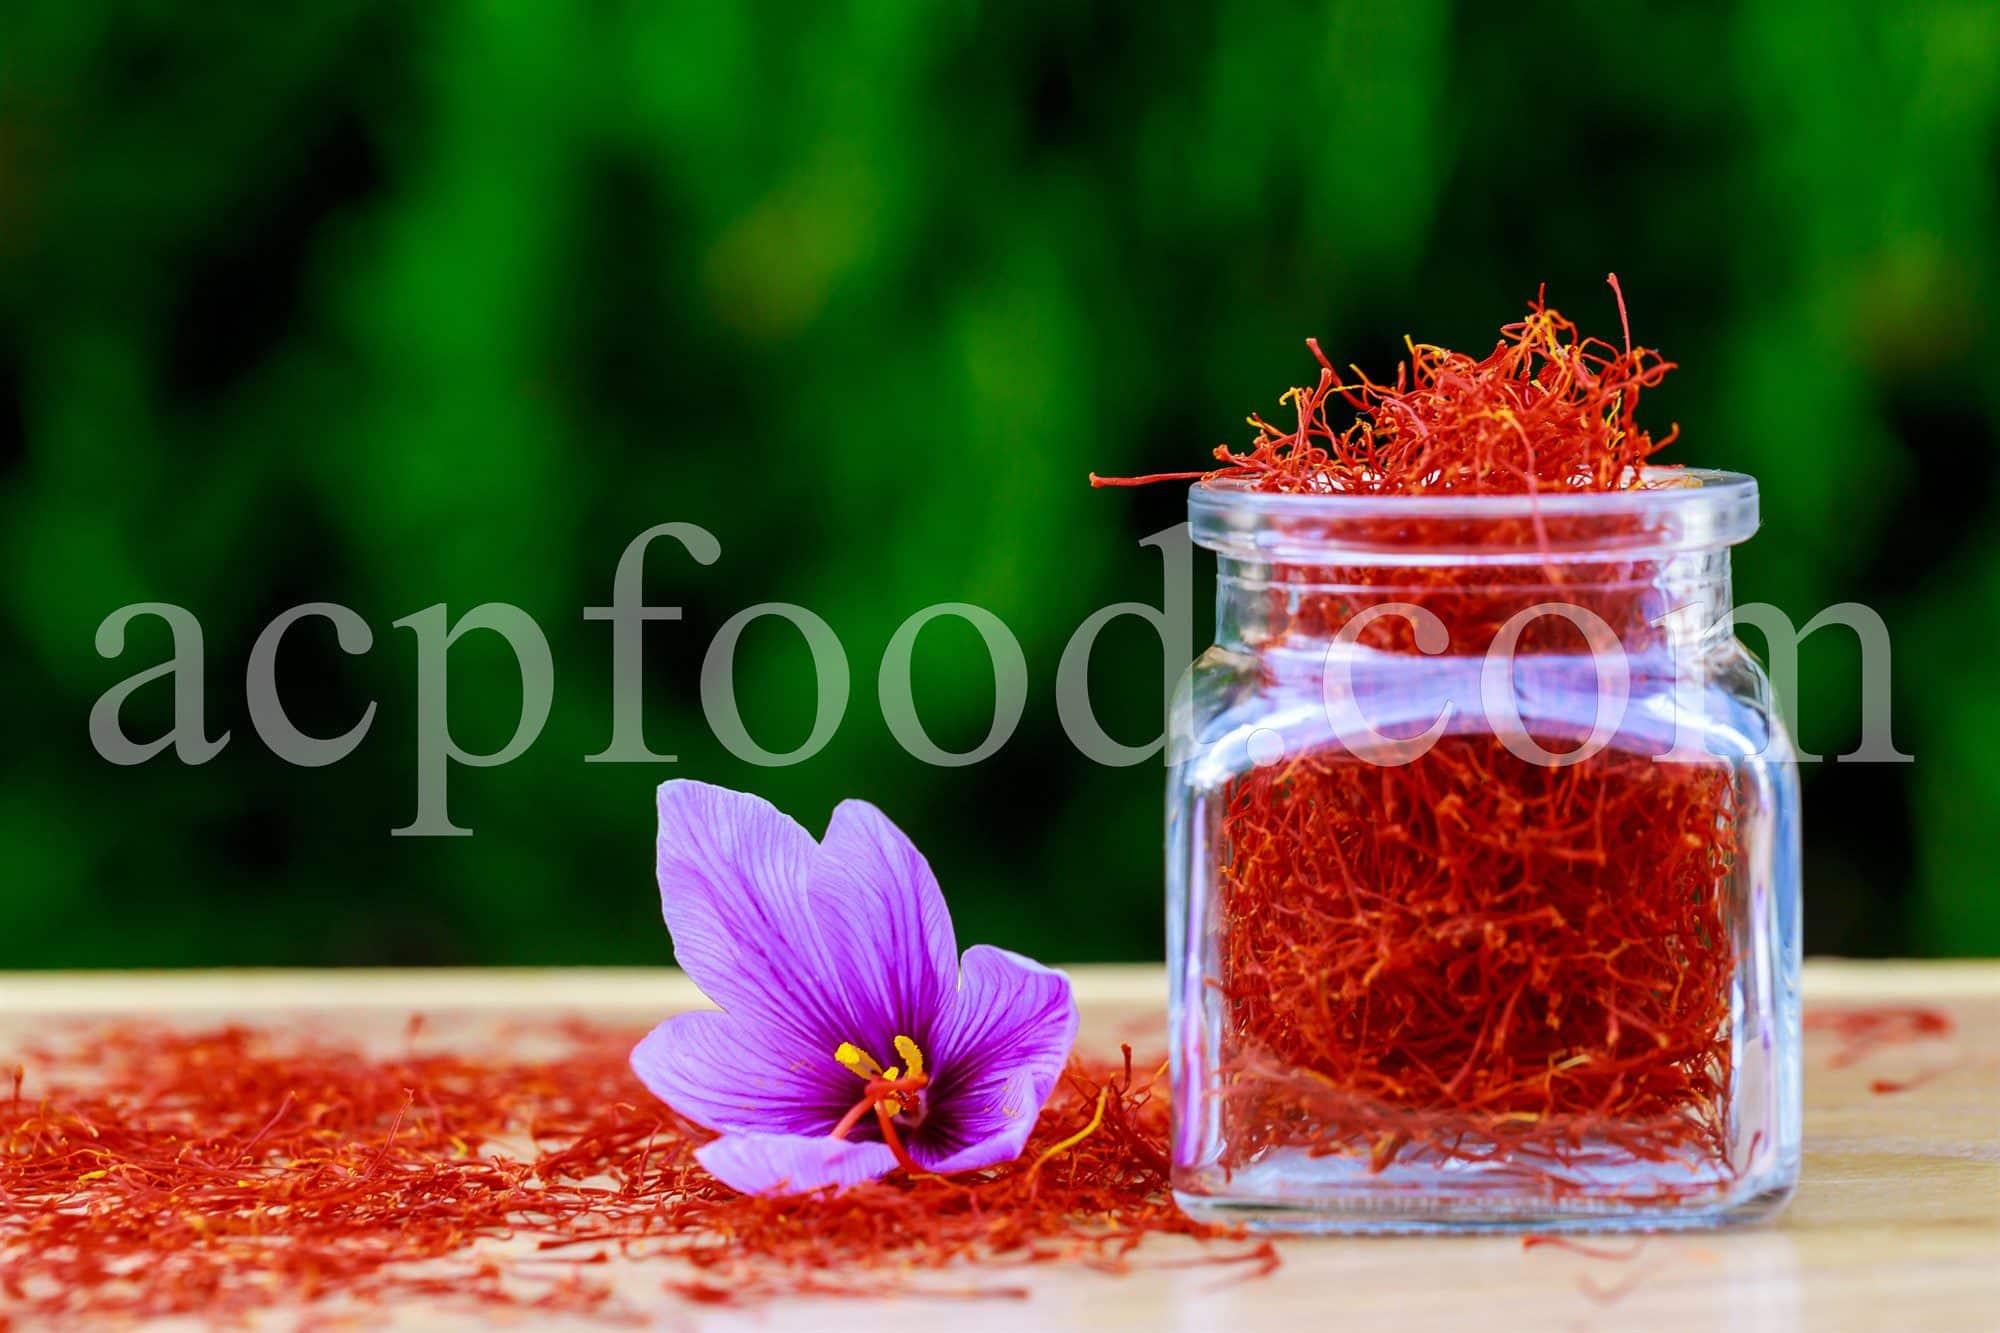 How to recognize real saffron. The different between real and fake saffron.